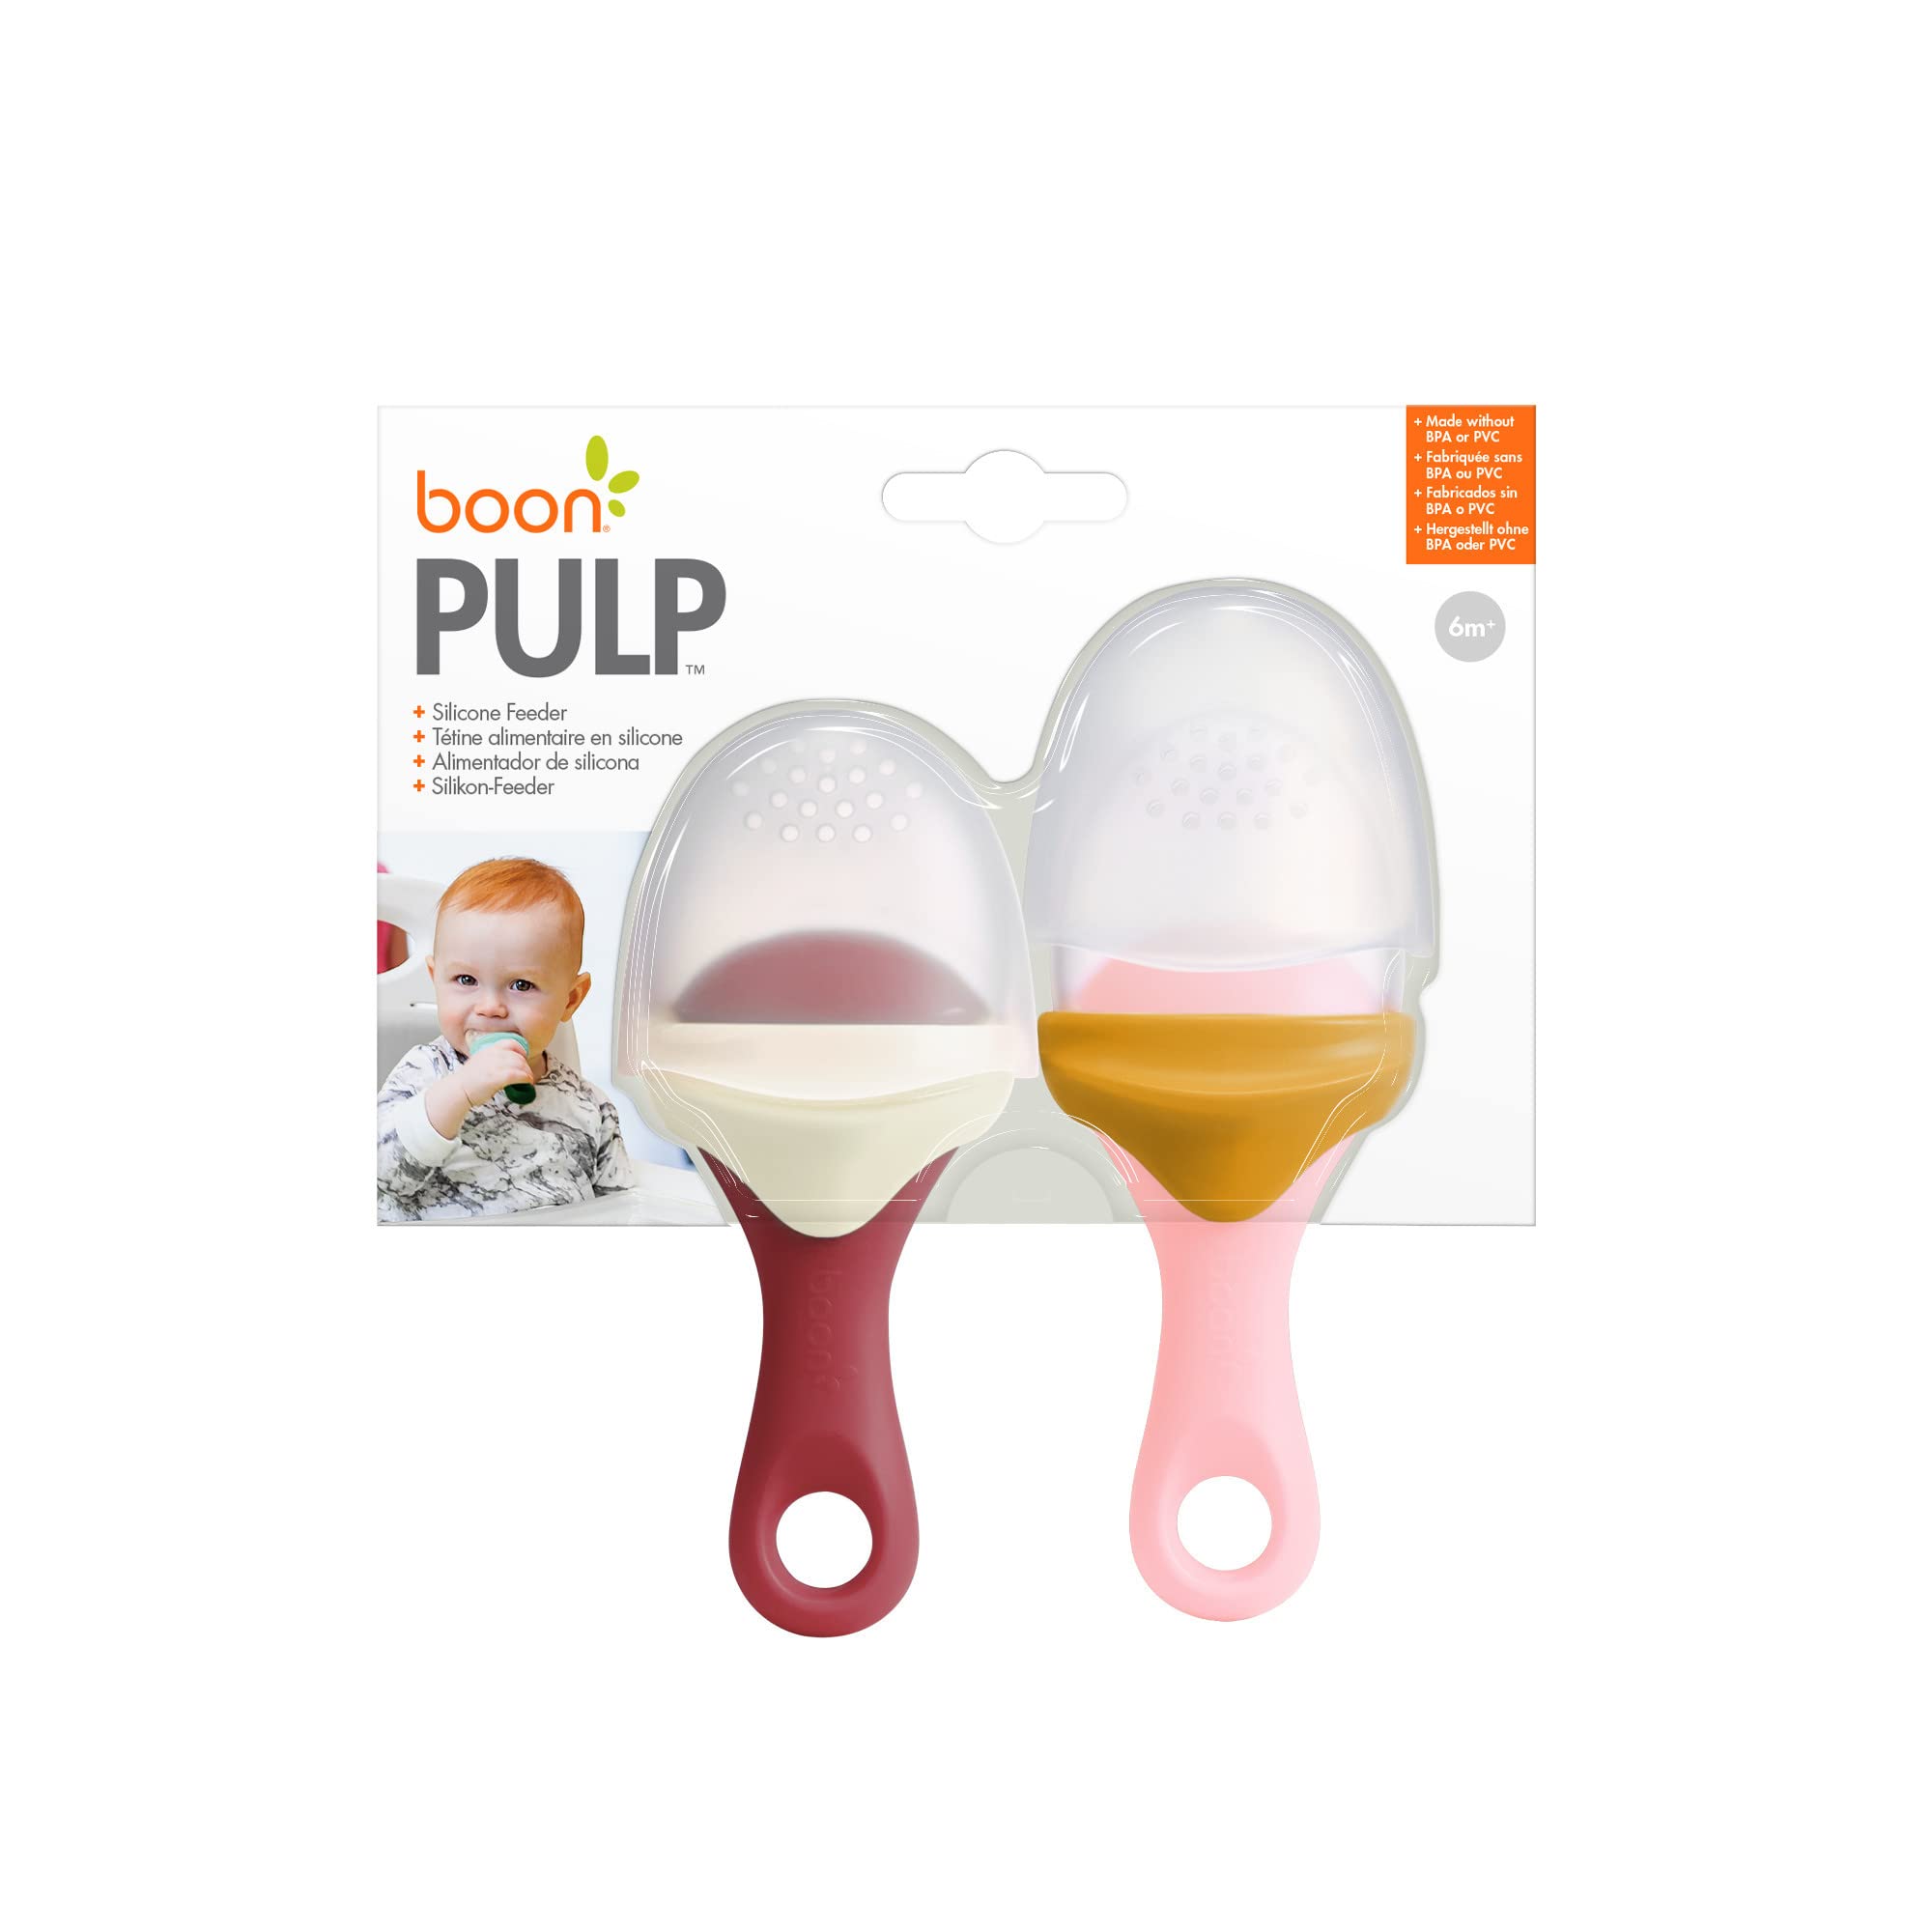 Boon PULP Silicone Baby Feeder — 2 Count — Orange/Pink and White/Mauve — Soft Silicone Vegetable and Fruit Feeders — Teething Baby Essentials